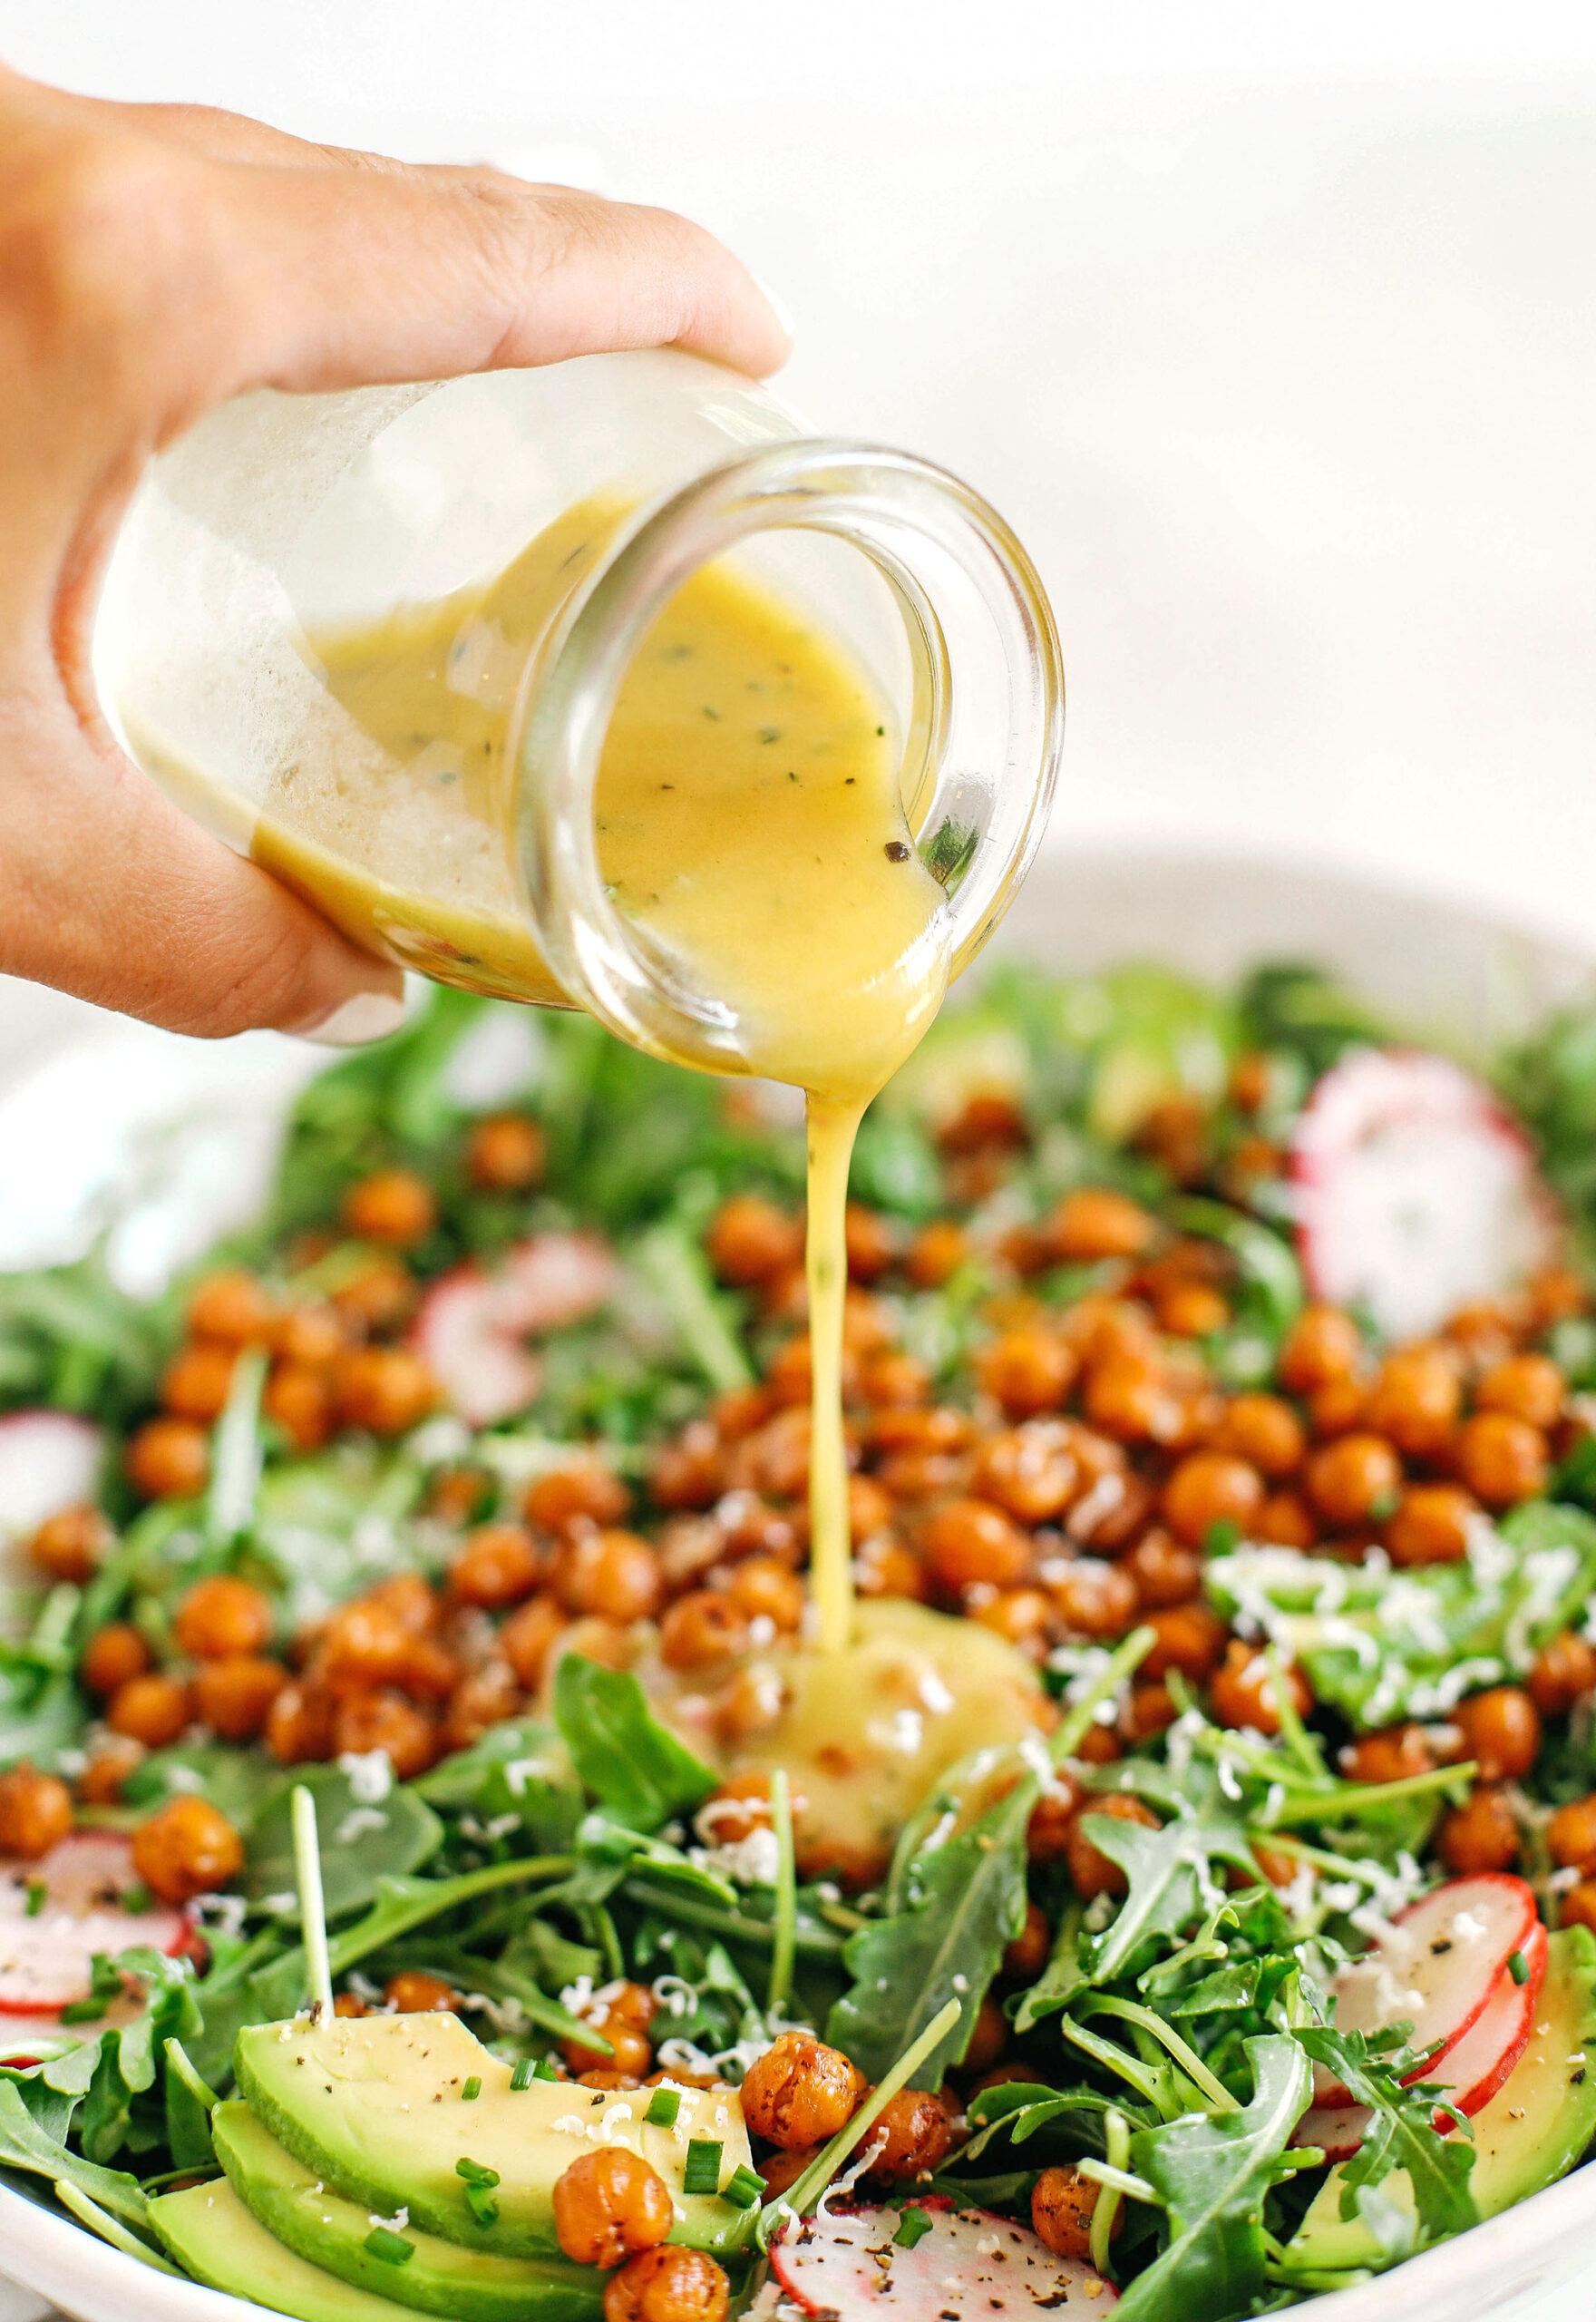 The most delicious Arugula Salad with Honey Roasted Chickpeas that are sweet, savory and perfectly crunchy!  Top with fresh veggies, avocado slices and my lemon dijon herb dressing!